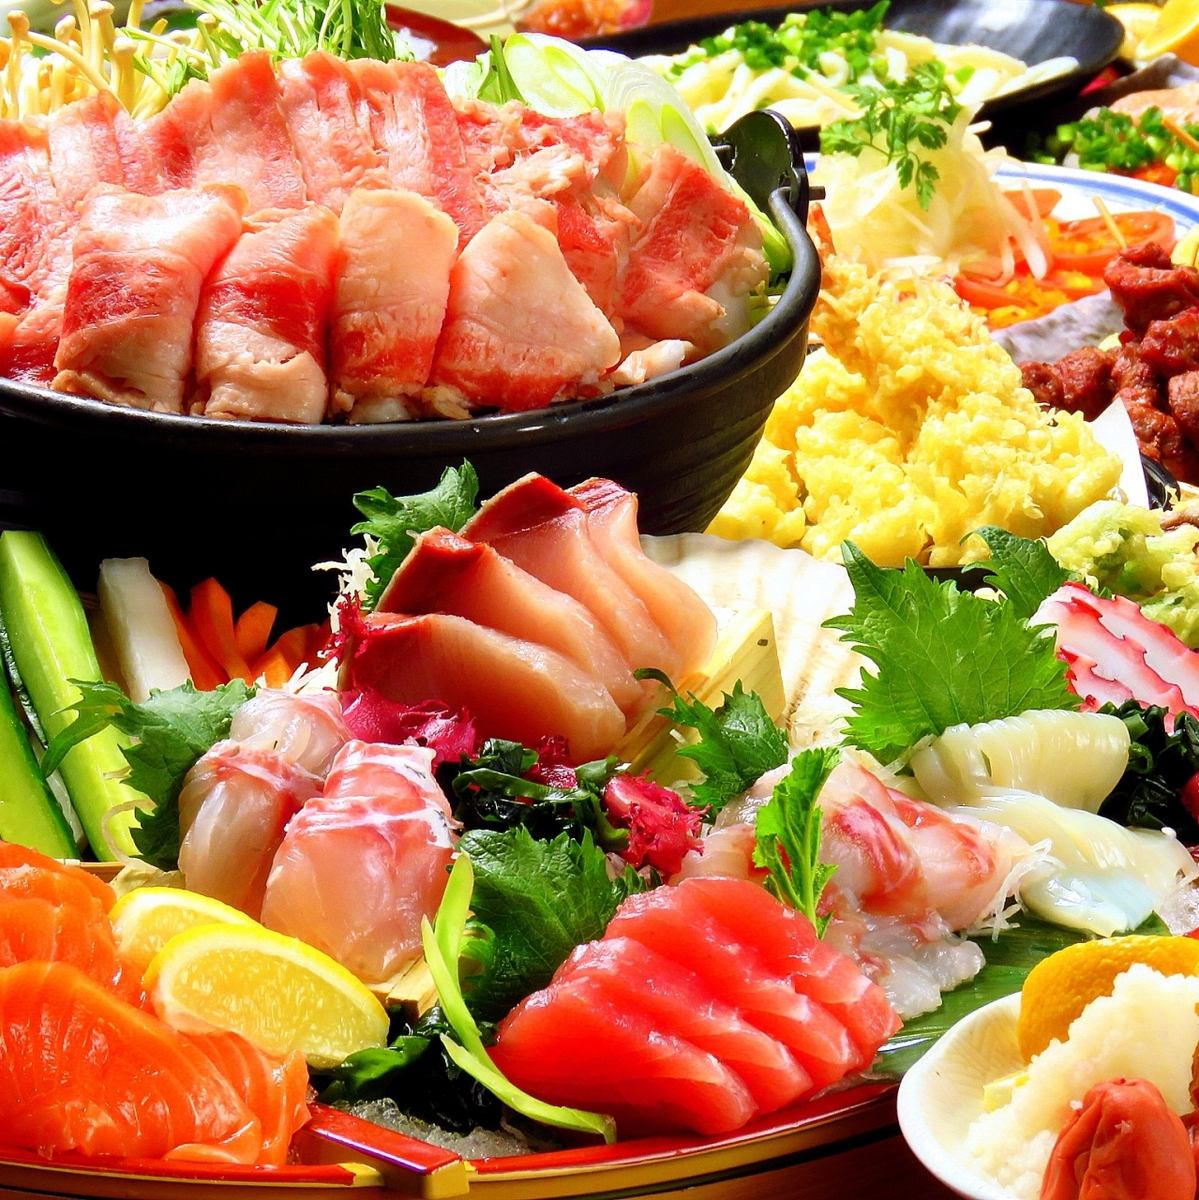 Banquet courses with all-you-can-drink options are available from the 3,000 yen range to suit your budget.